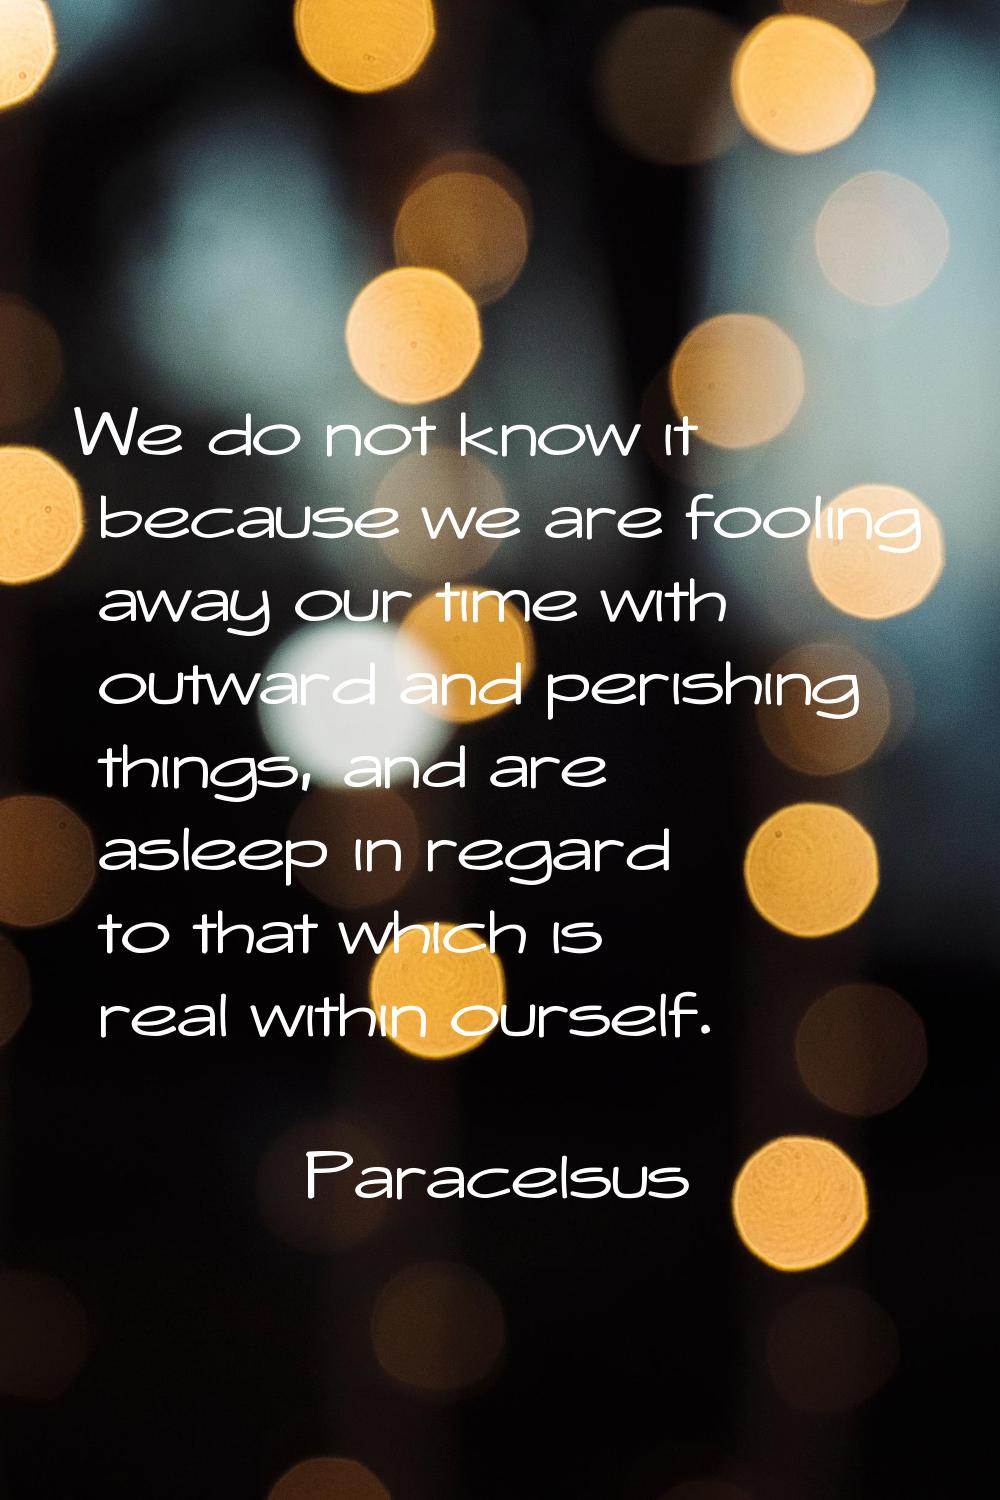 We do not know it because we are fooling away our time with outward and perishing things, and are a